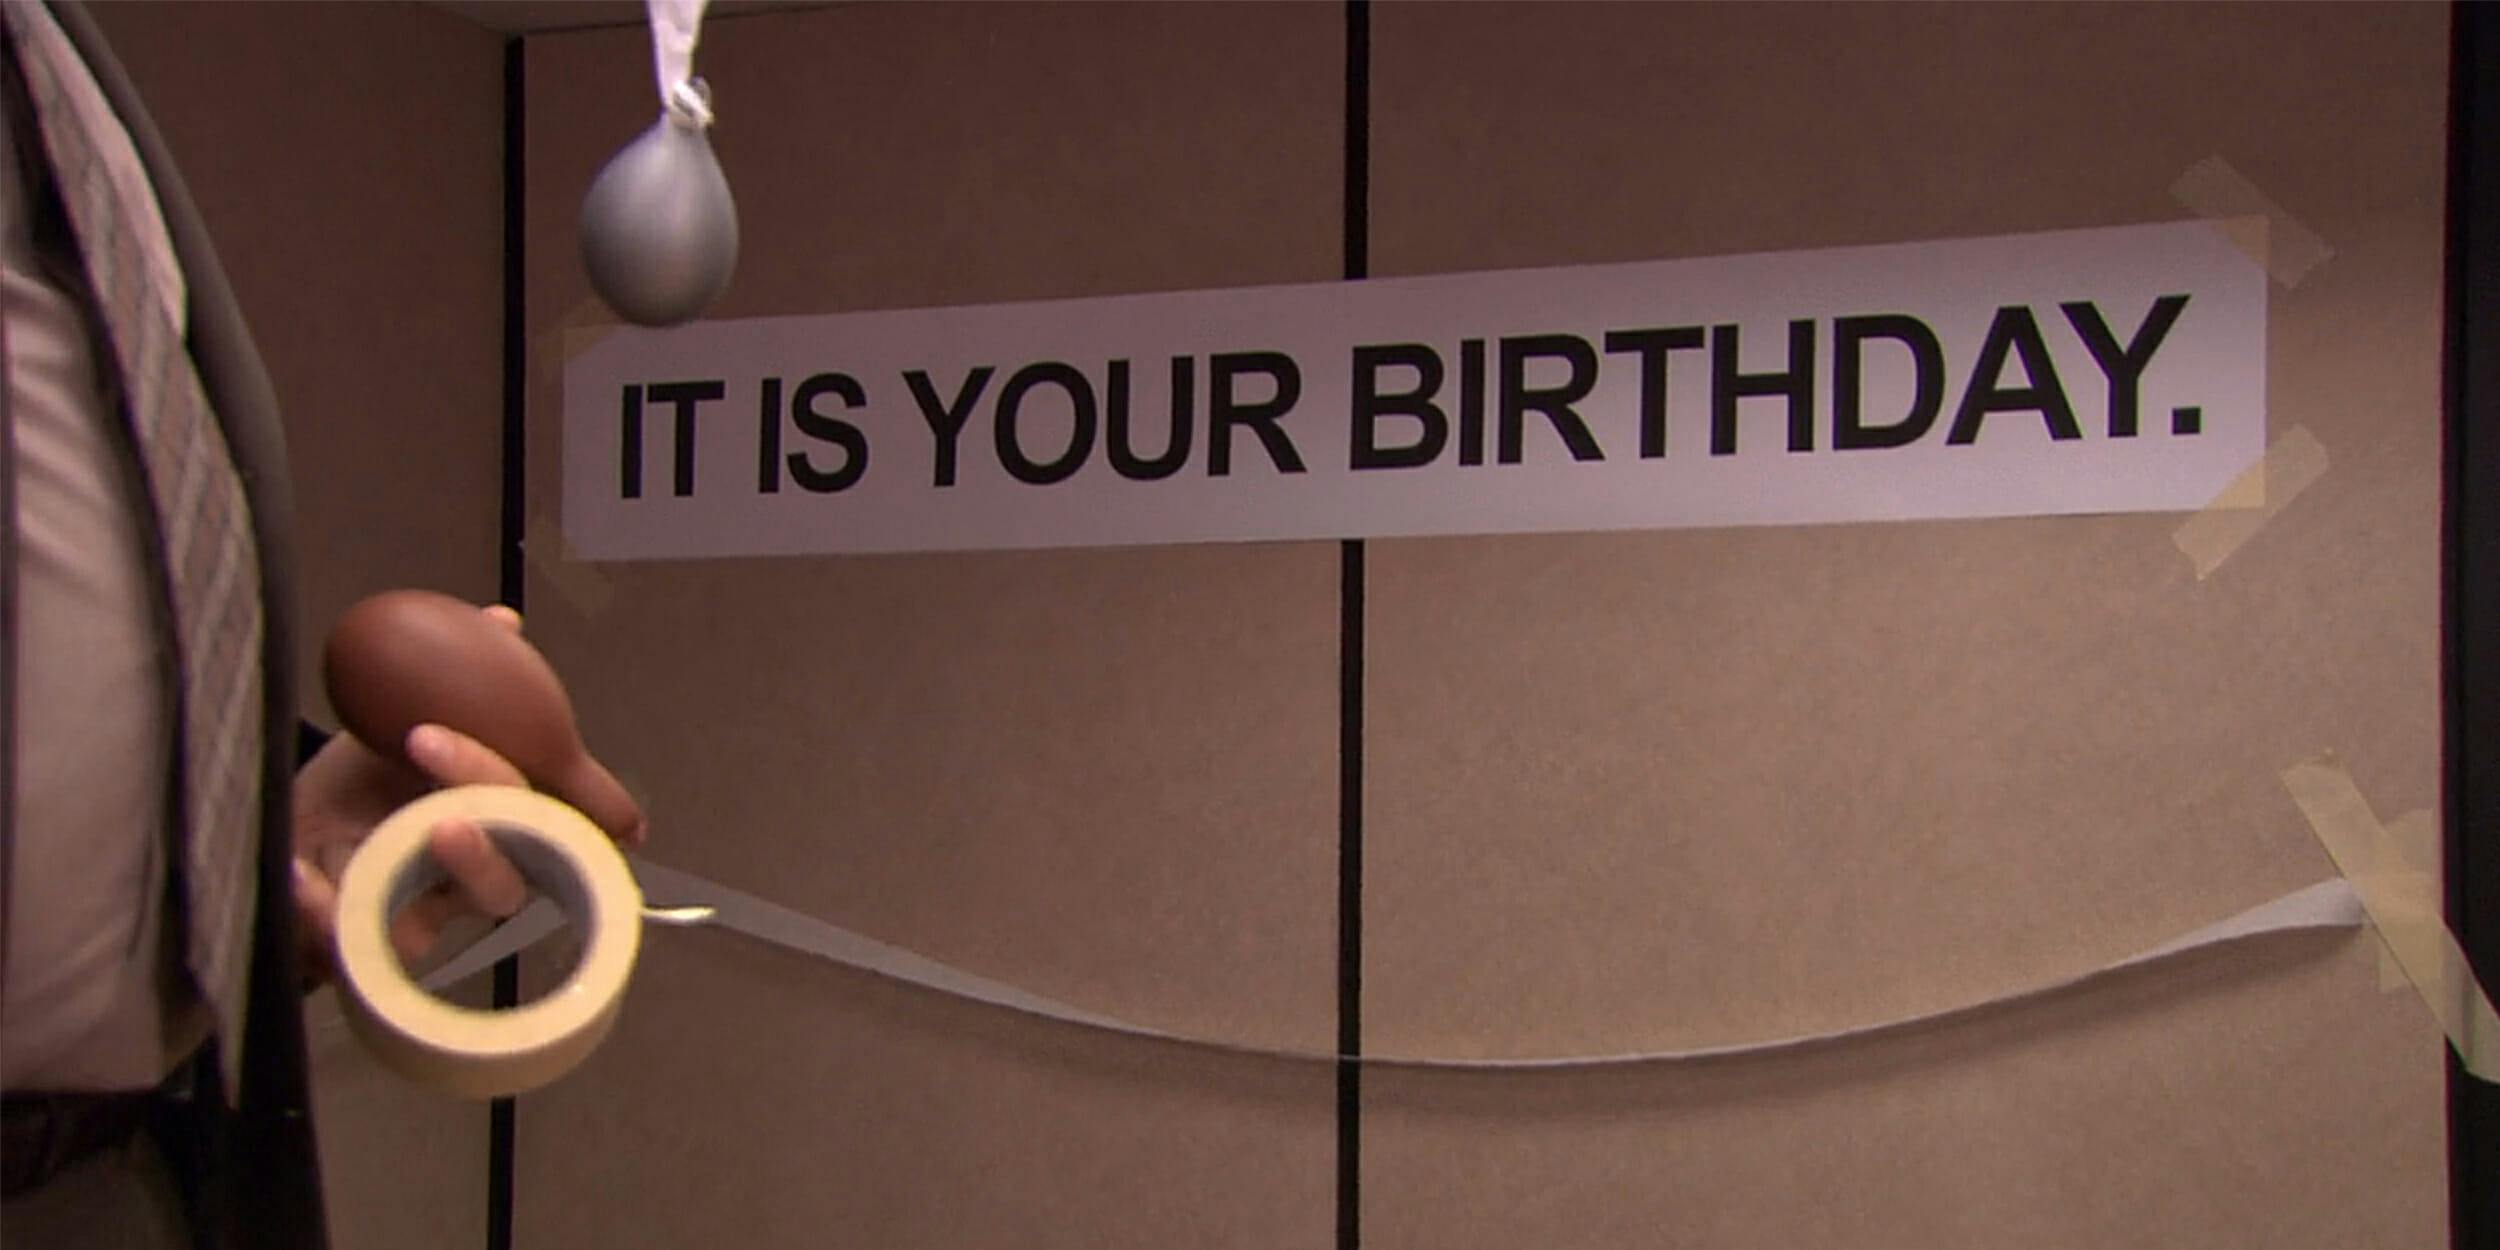 Dwight from "The Office" puts up "It is your birthday." sign in break room